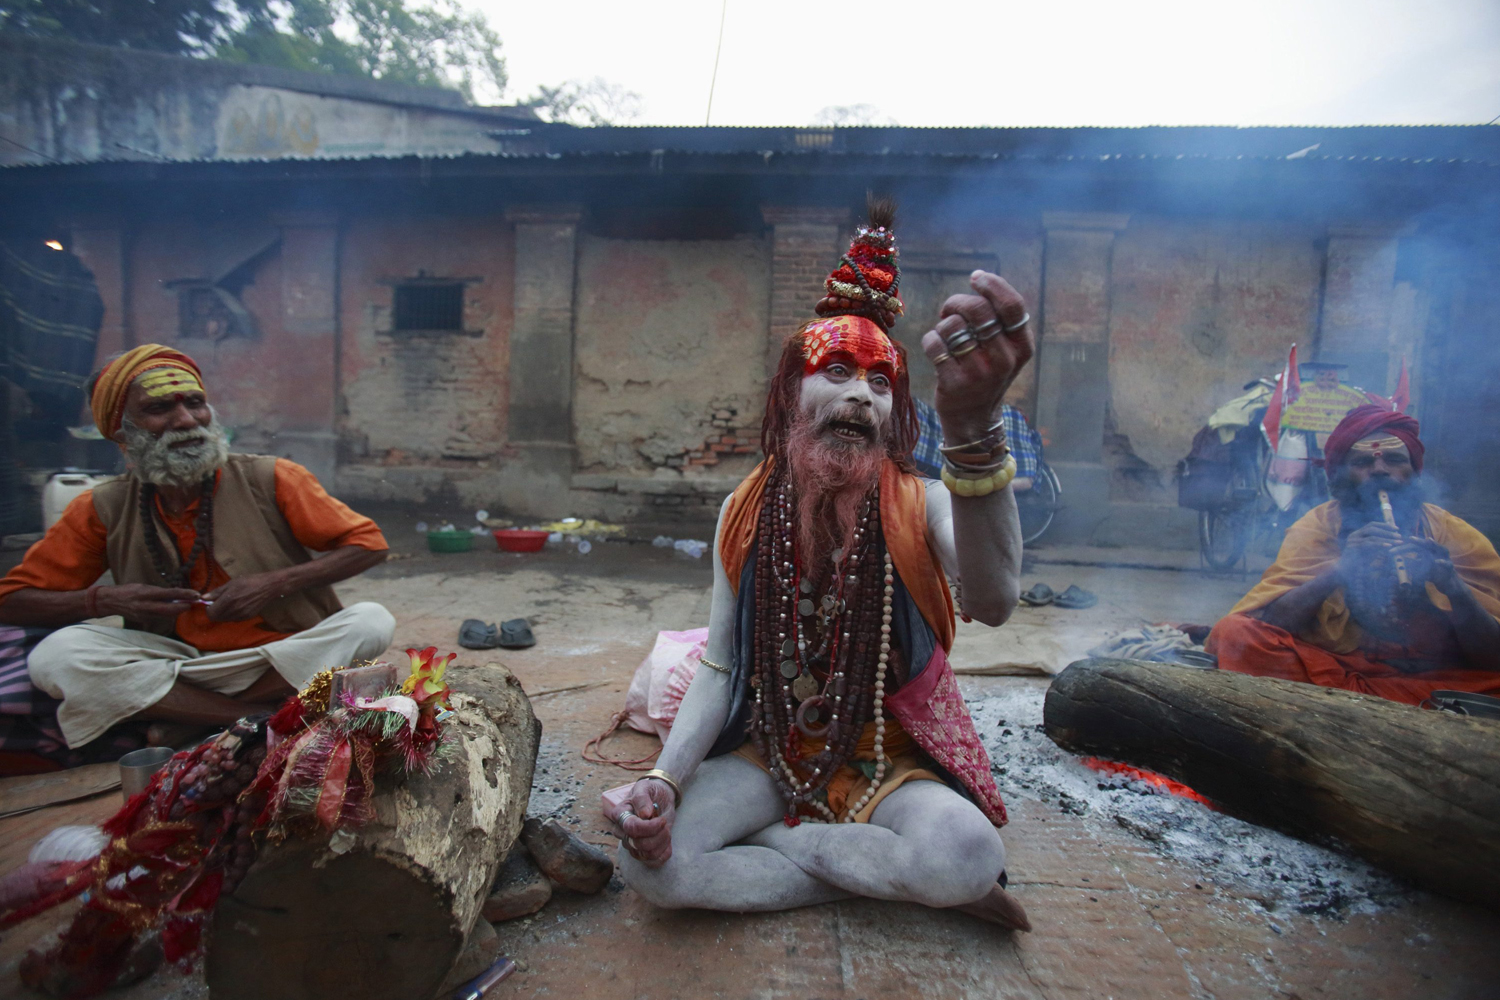 A sadhu asks for money from devotees on the premises of Pashupatinath Temple during the Shivaratri festival in Kathmandu